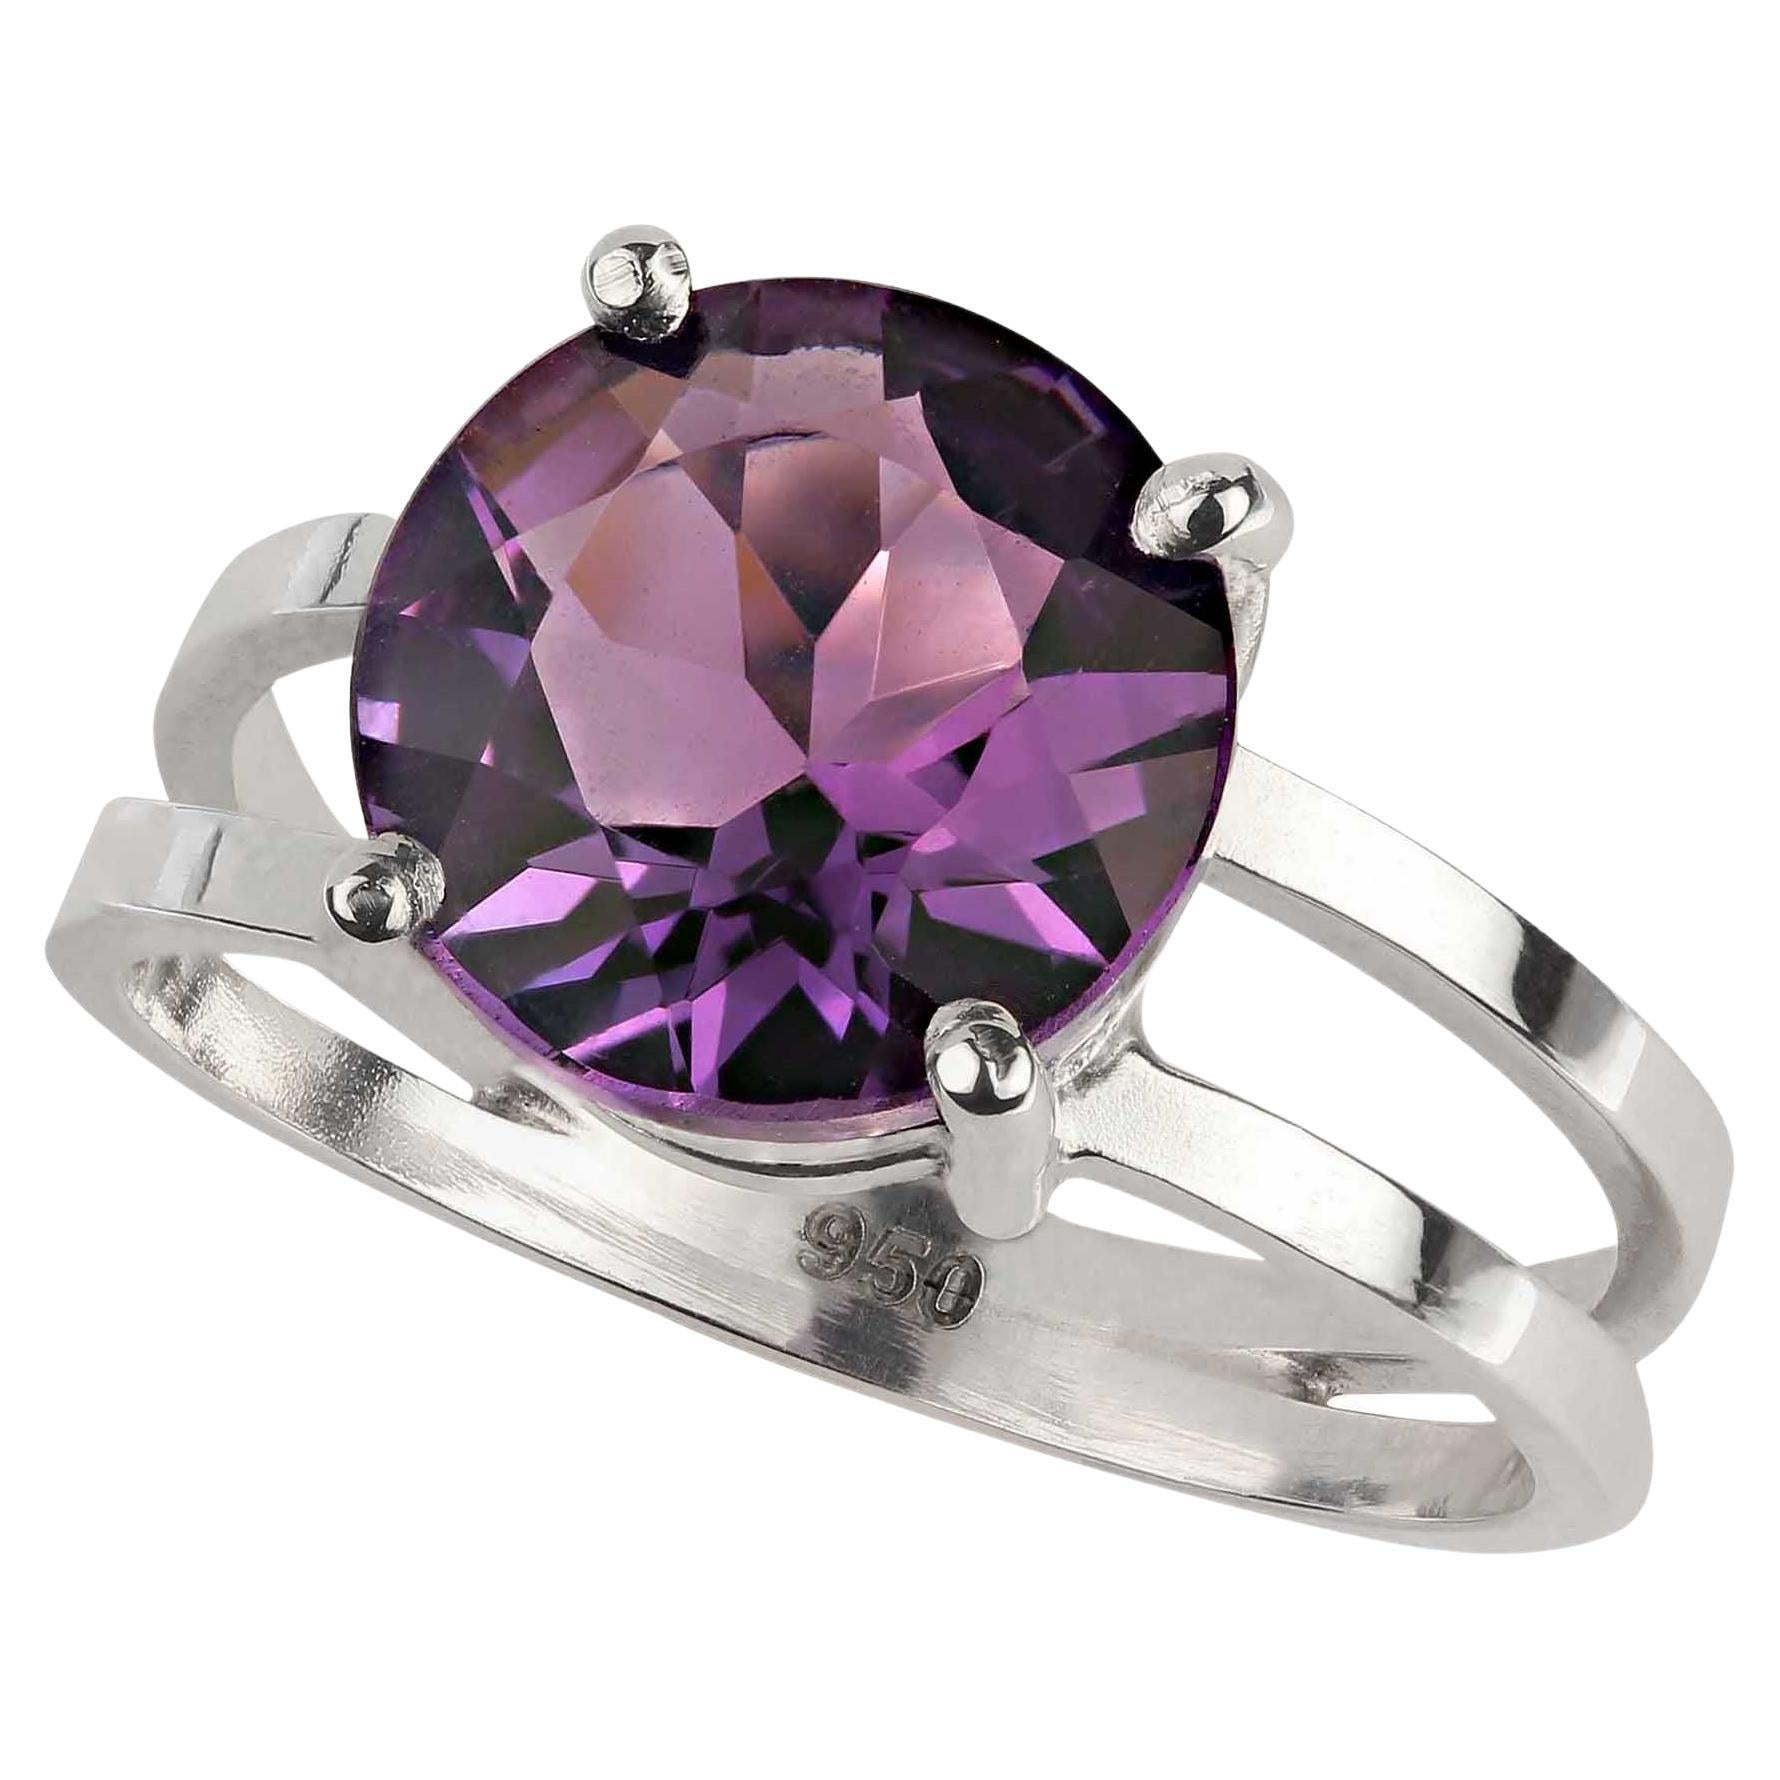 AJD Unusual Round 3.52 Carat Amethyst in Sterling Silver Ring For Sale